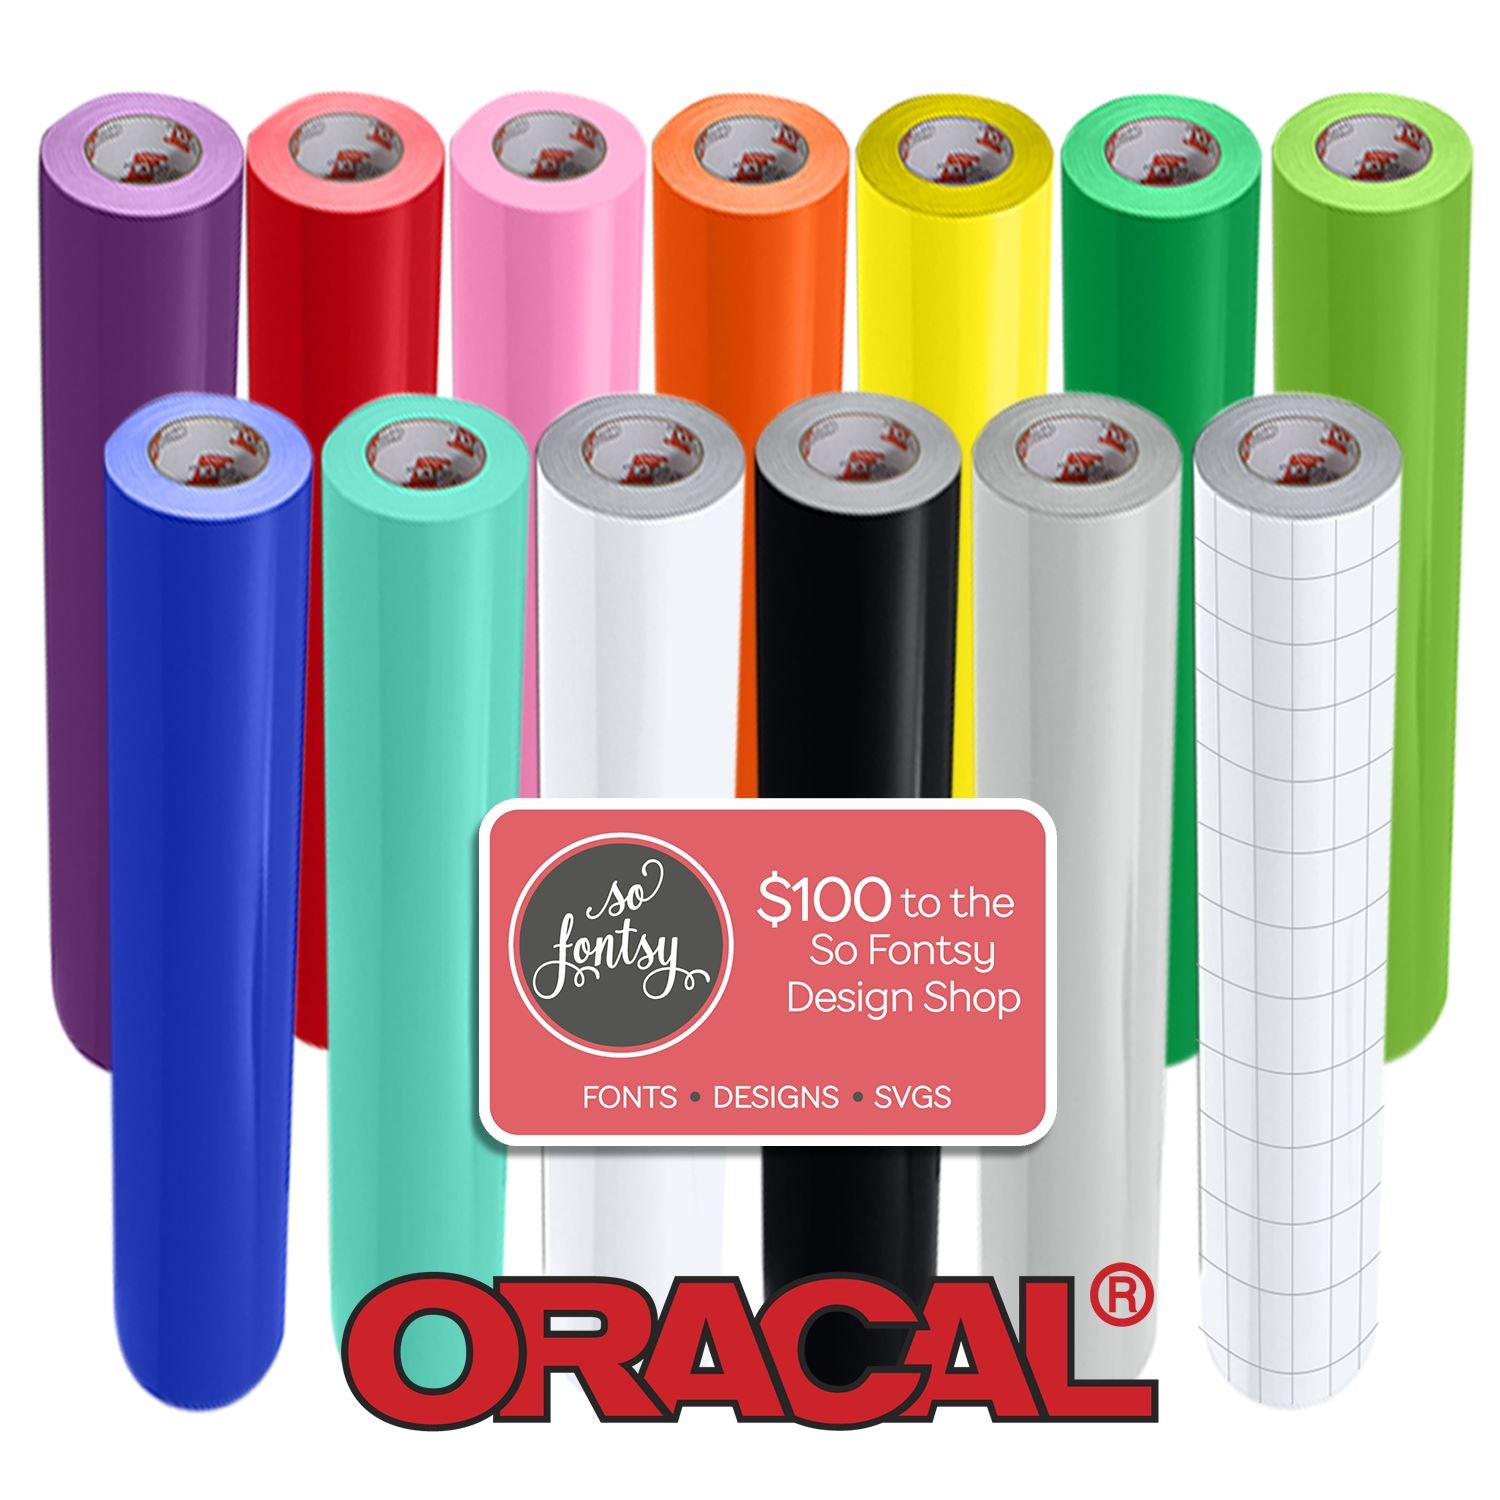 12 x 100' Roll of Paper Transfer Tape For Vinyl Decals And